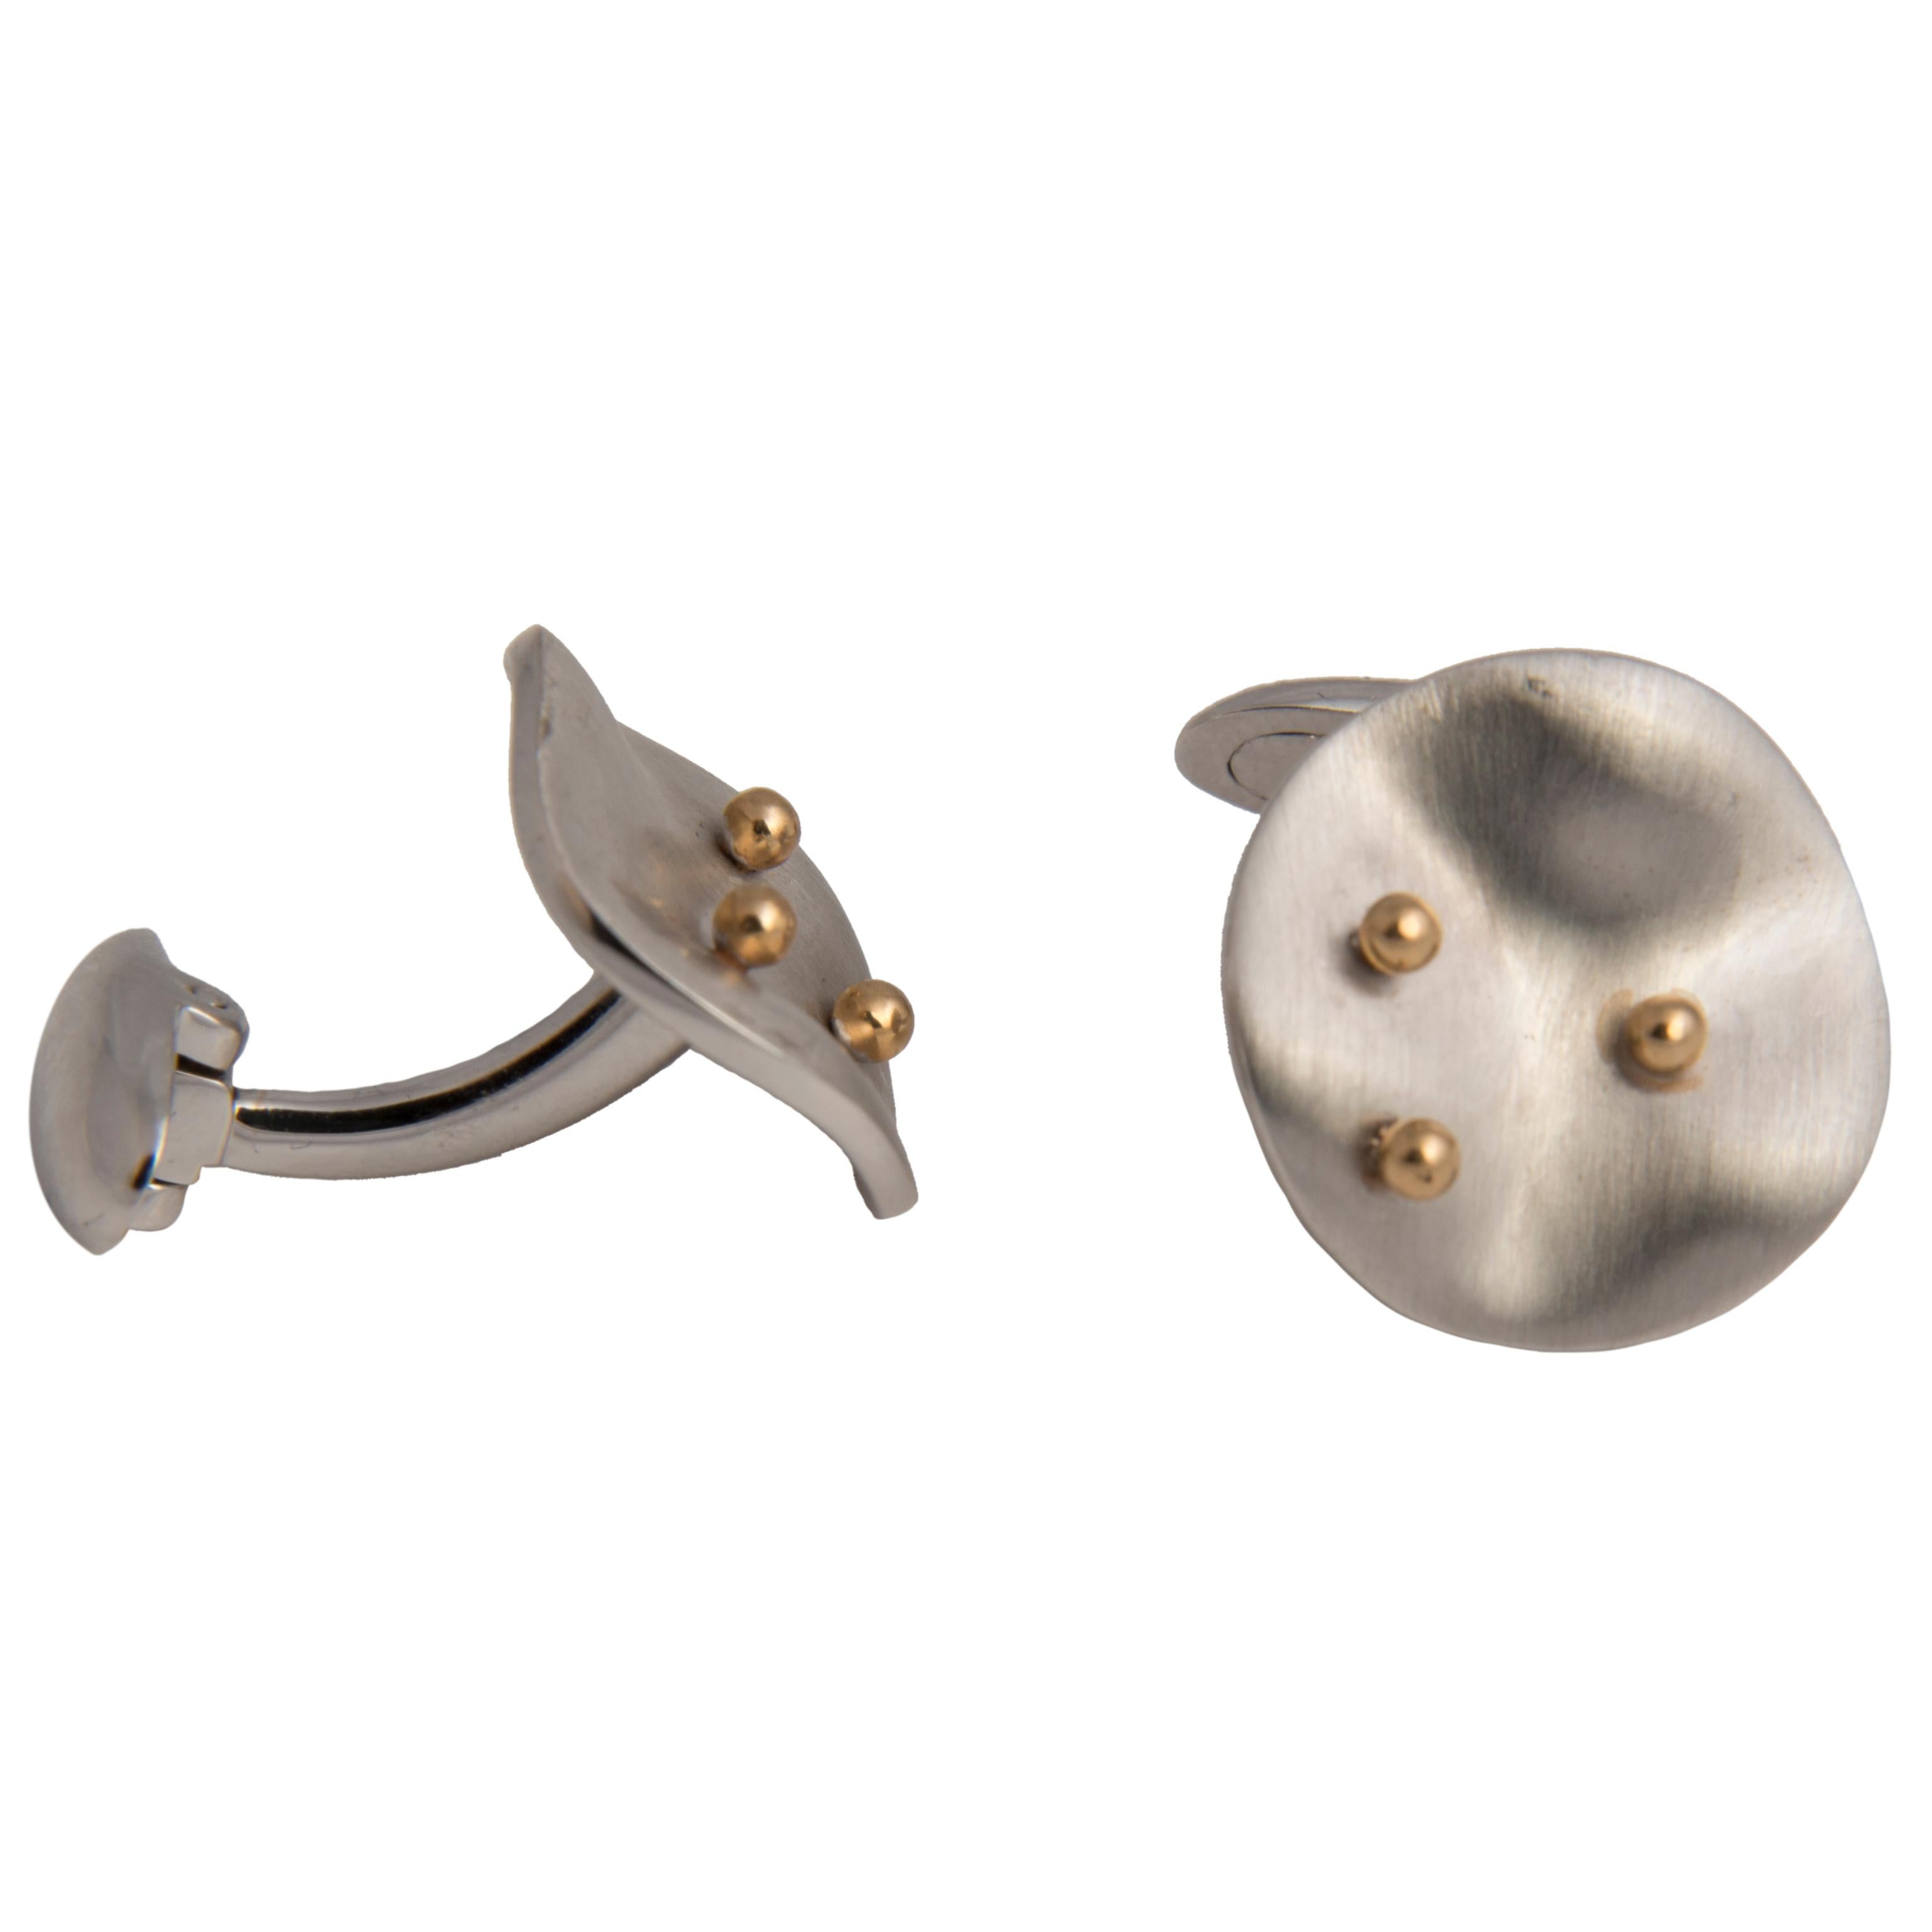 Pair of cufflinks by Florence Larochas, designed as brushed 18kt white gold circular waved discs set with three 18kt yellow gold pearls each.
Signed F. Larochas Paris, French hallmarks
Unique
Circa 2010